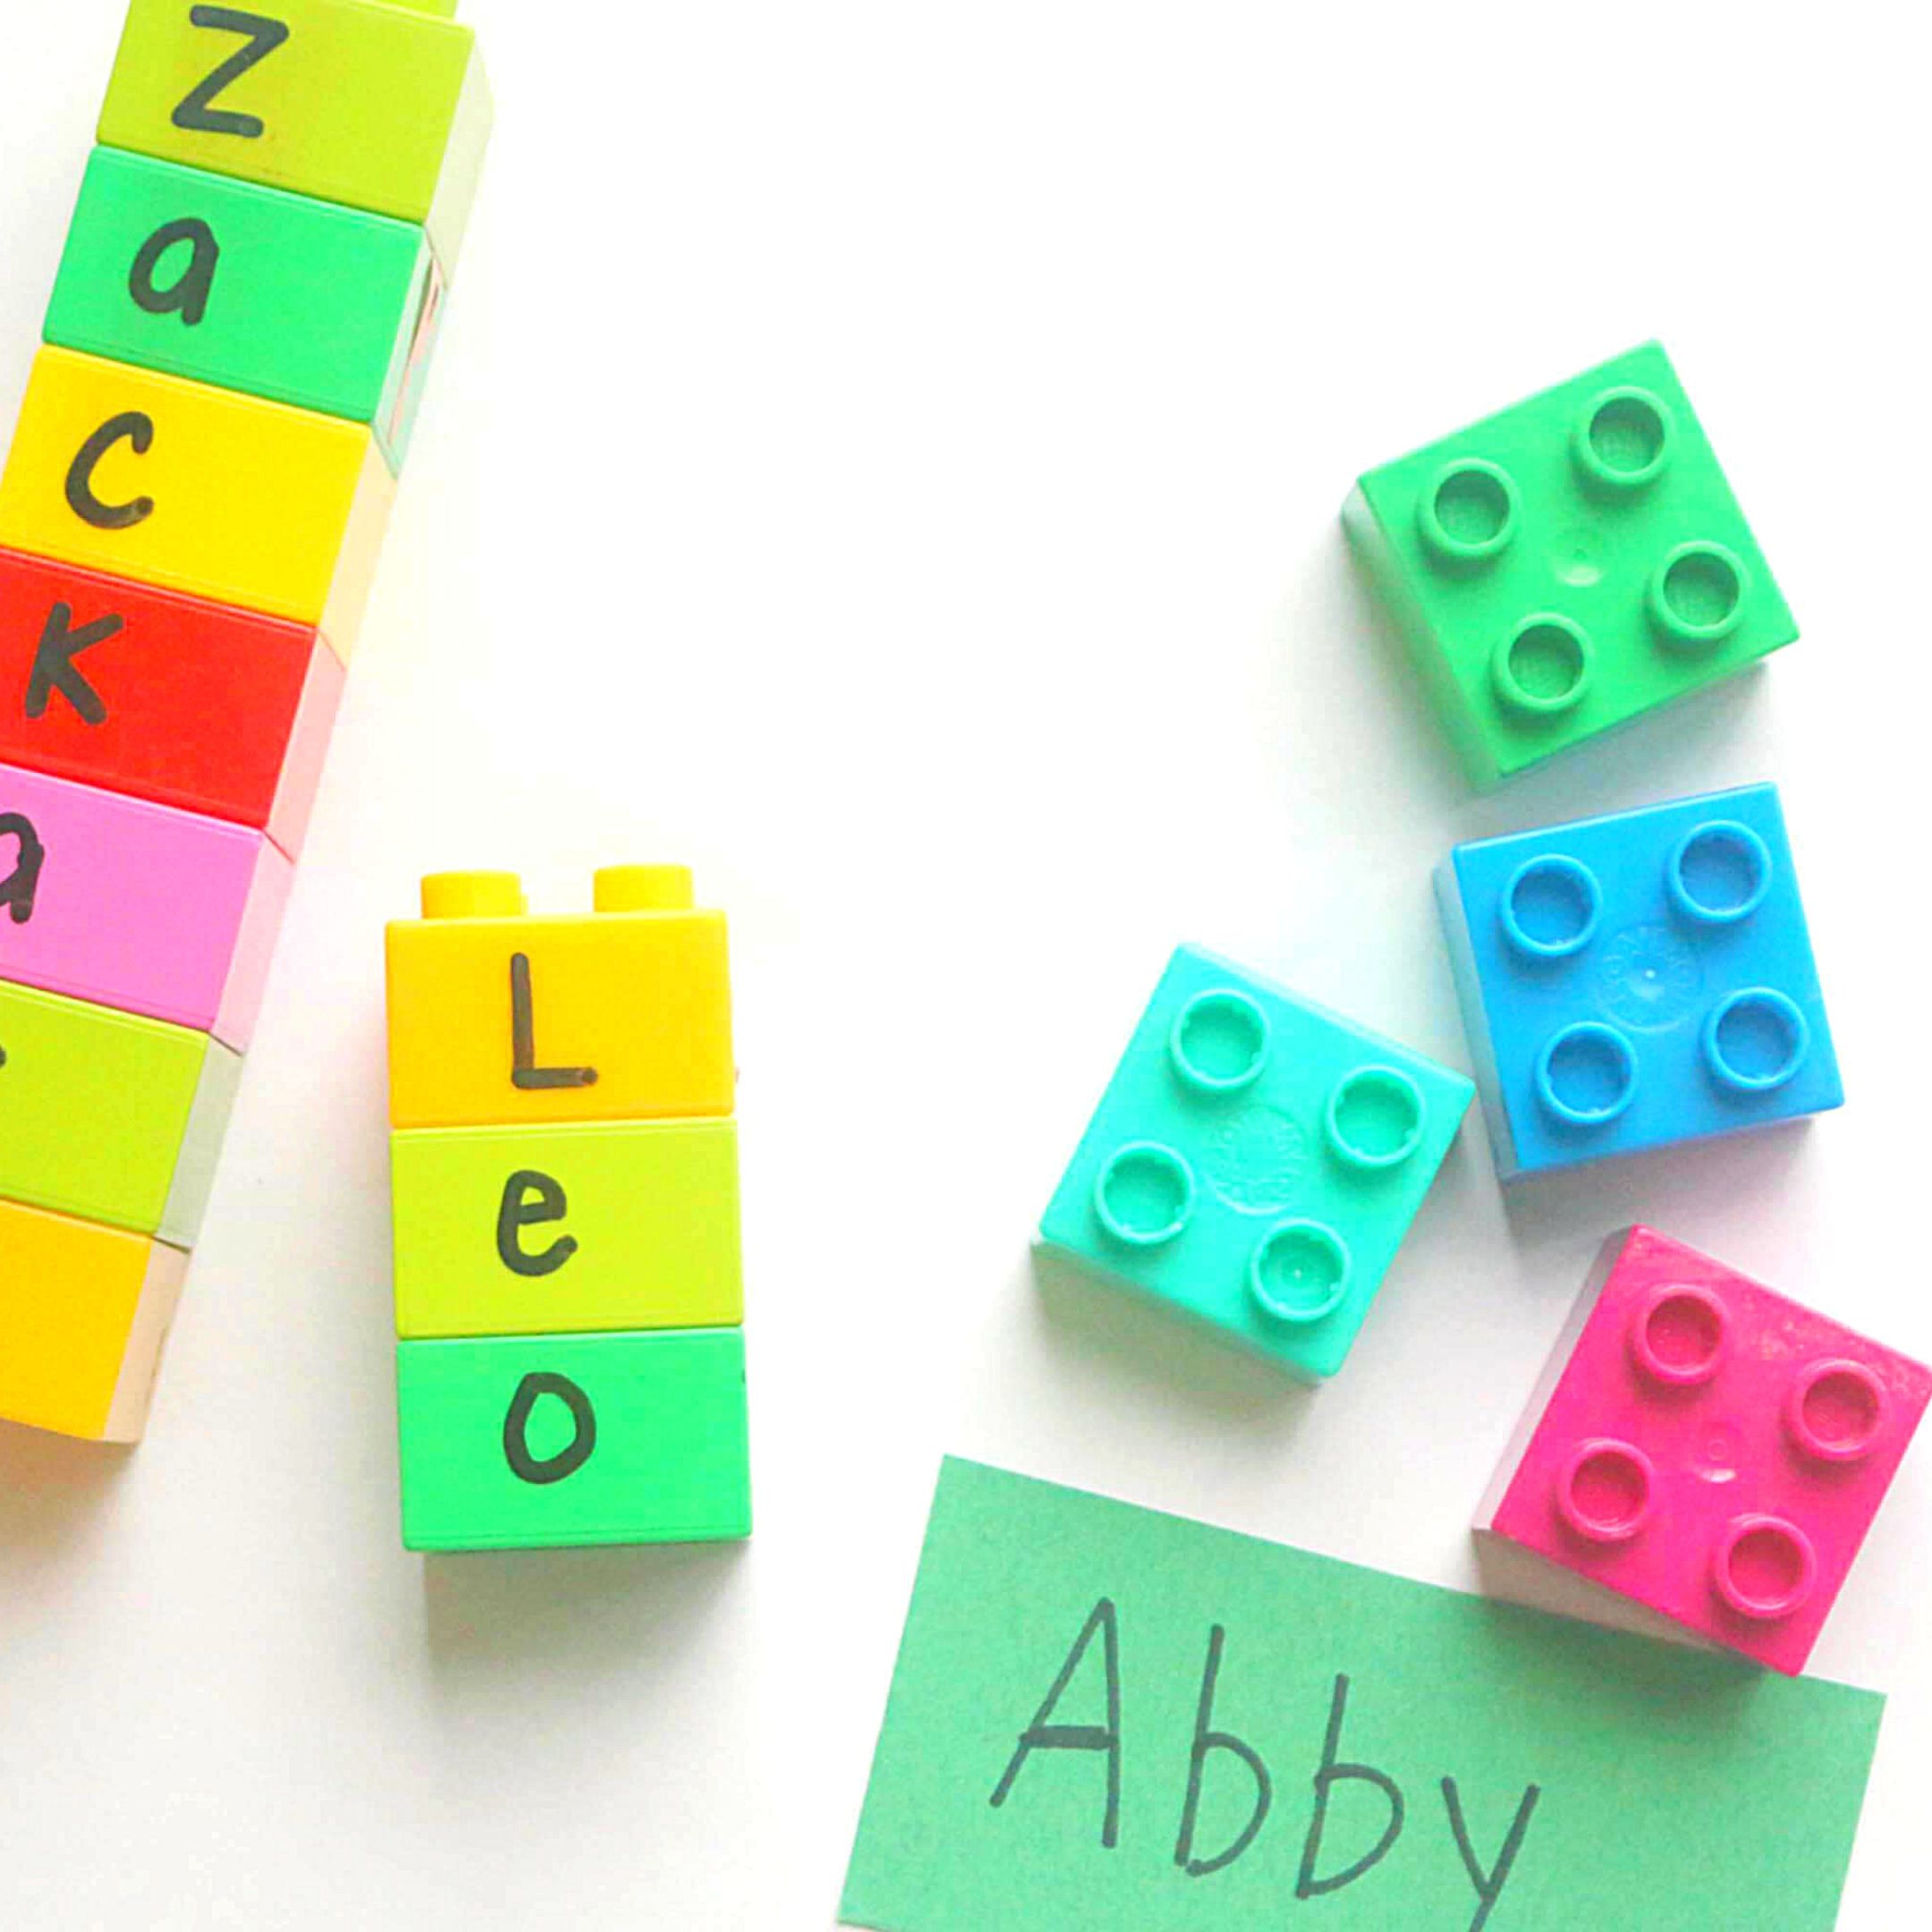 Image of LEGO Duplo blocks stacked to spell names of preschoolers